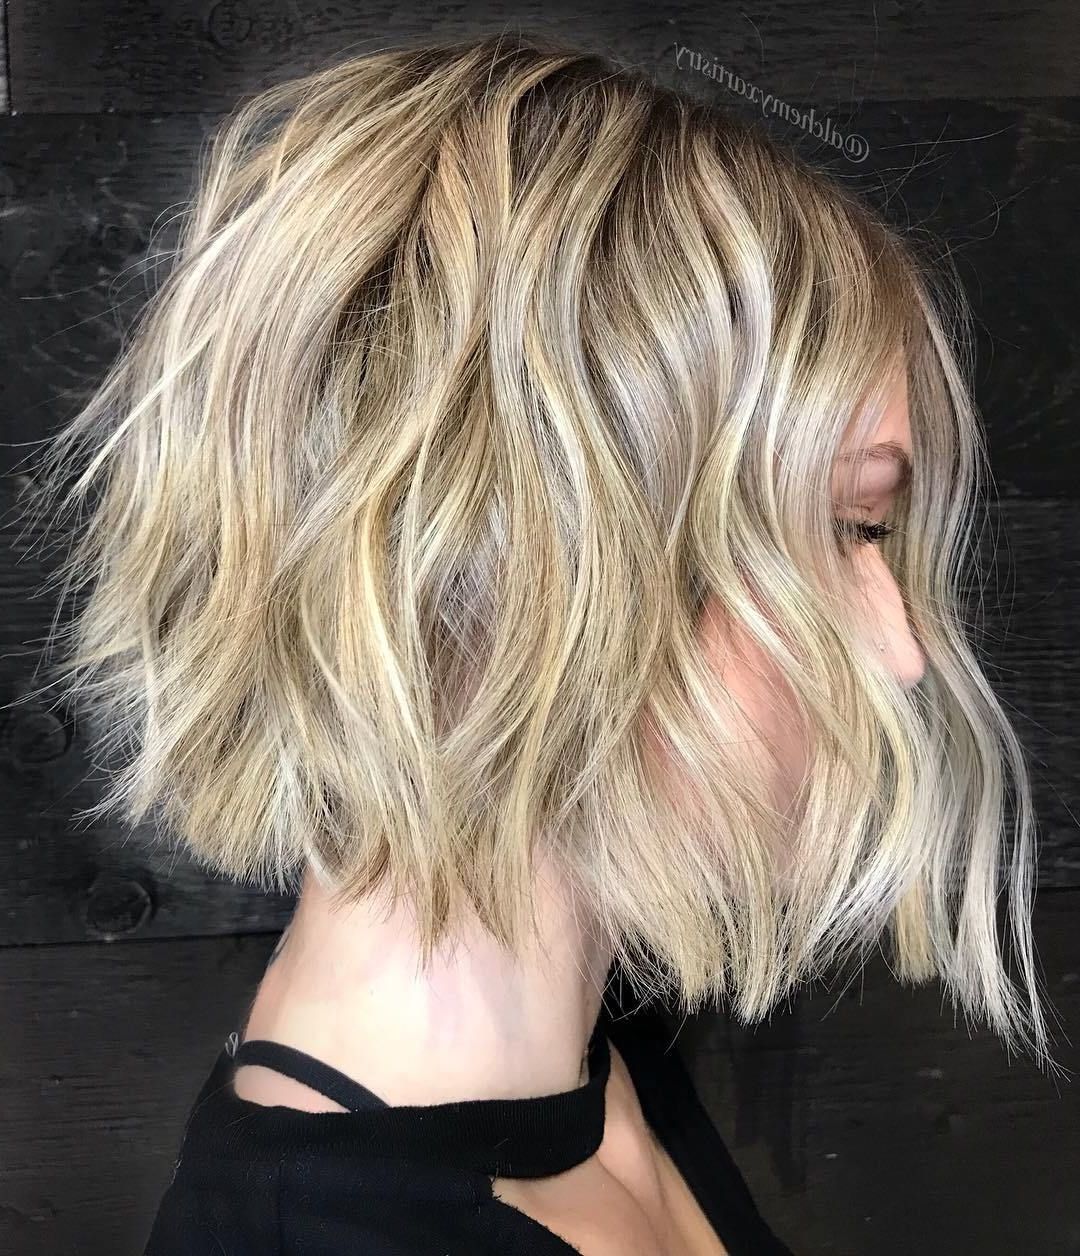 70 Devastatingly Cool Haircuts For Thin Hair | Hair | Pinterest In Hazel Blonde Razored Bob Hairstyles (View 11 of 20)